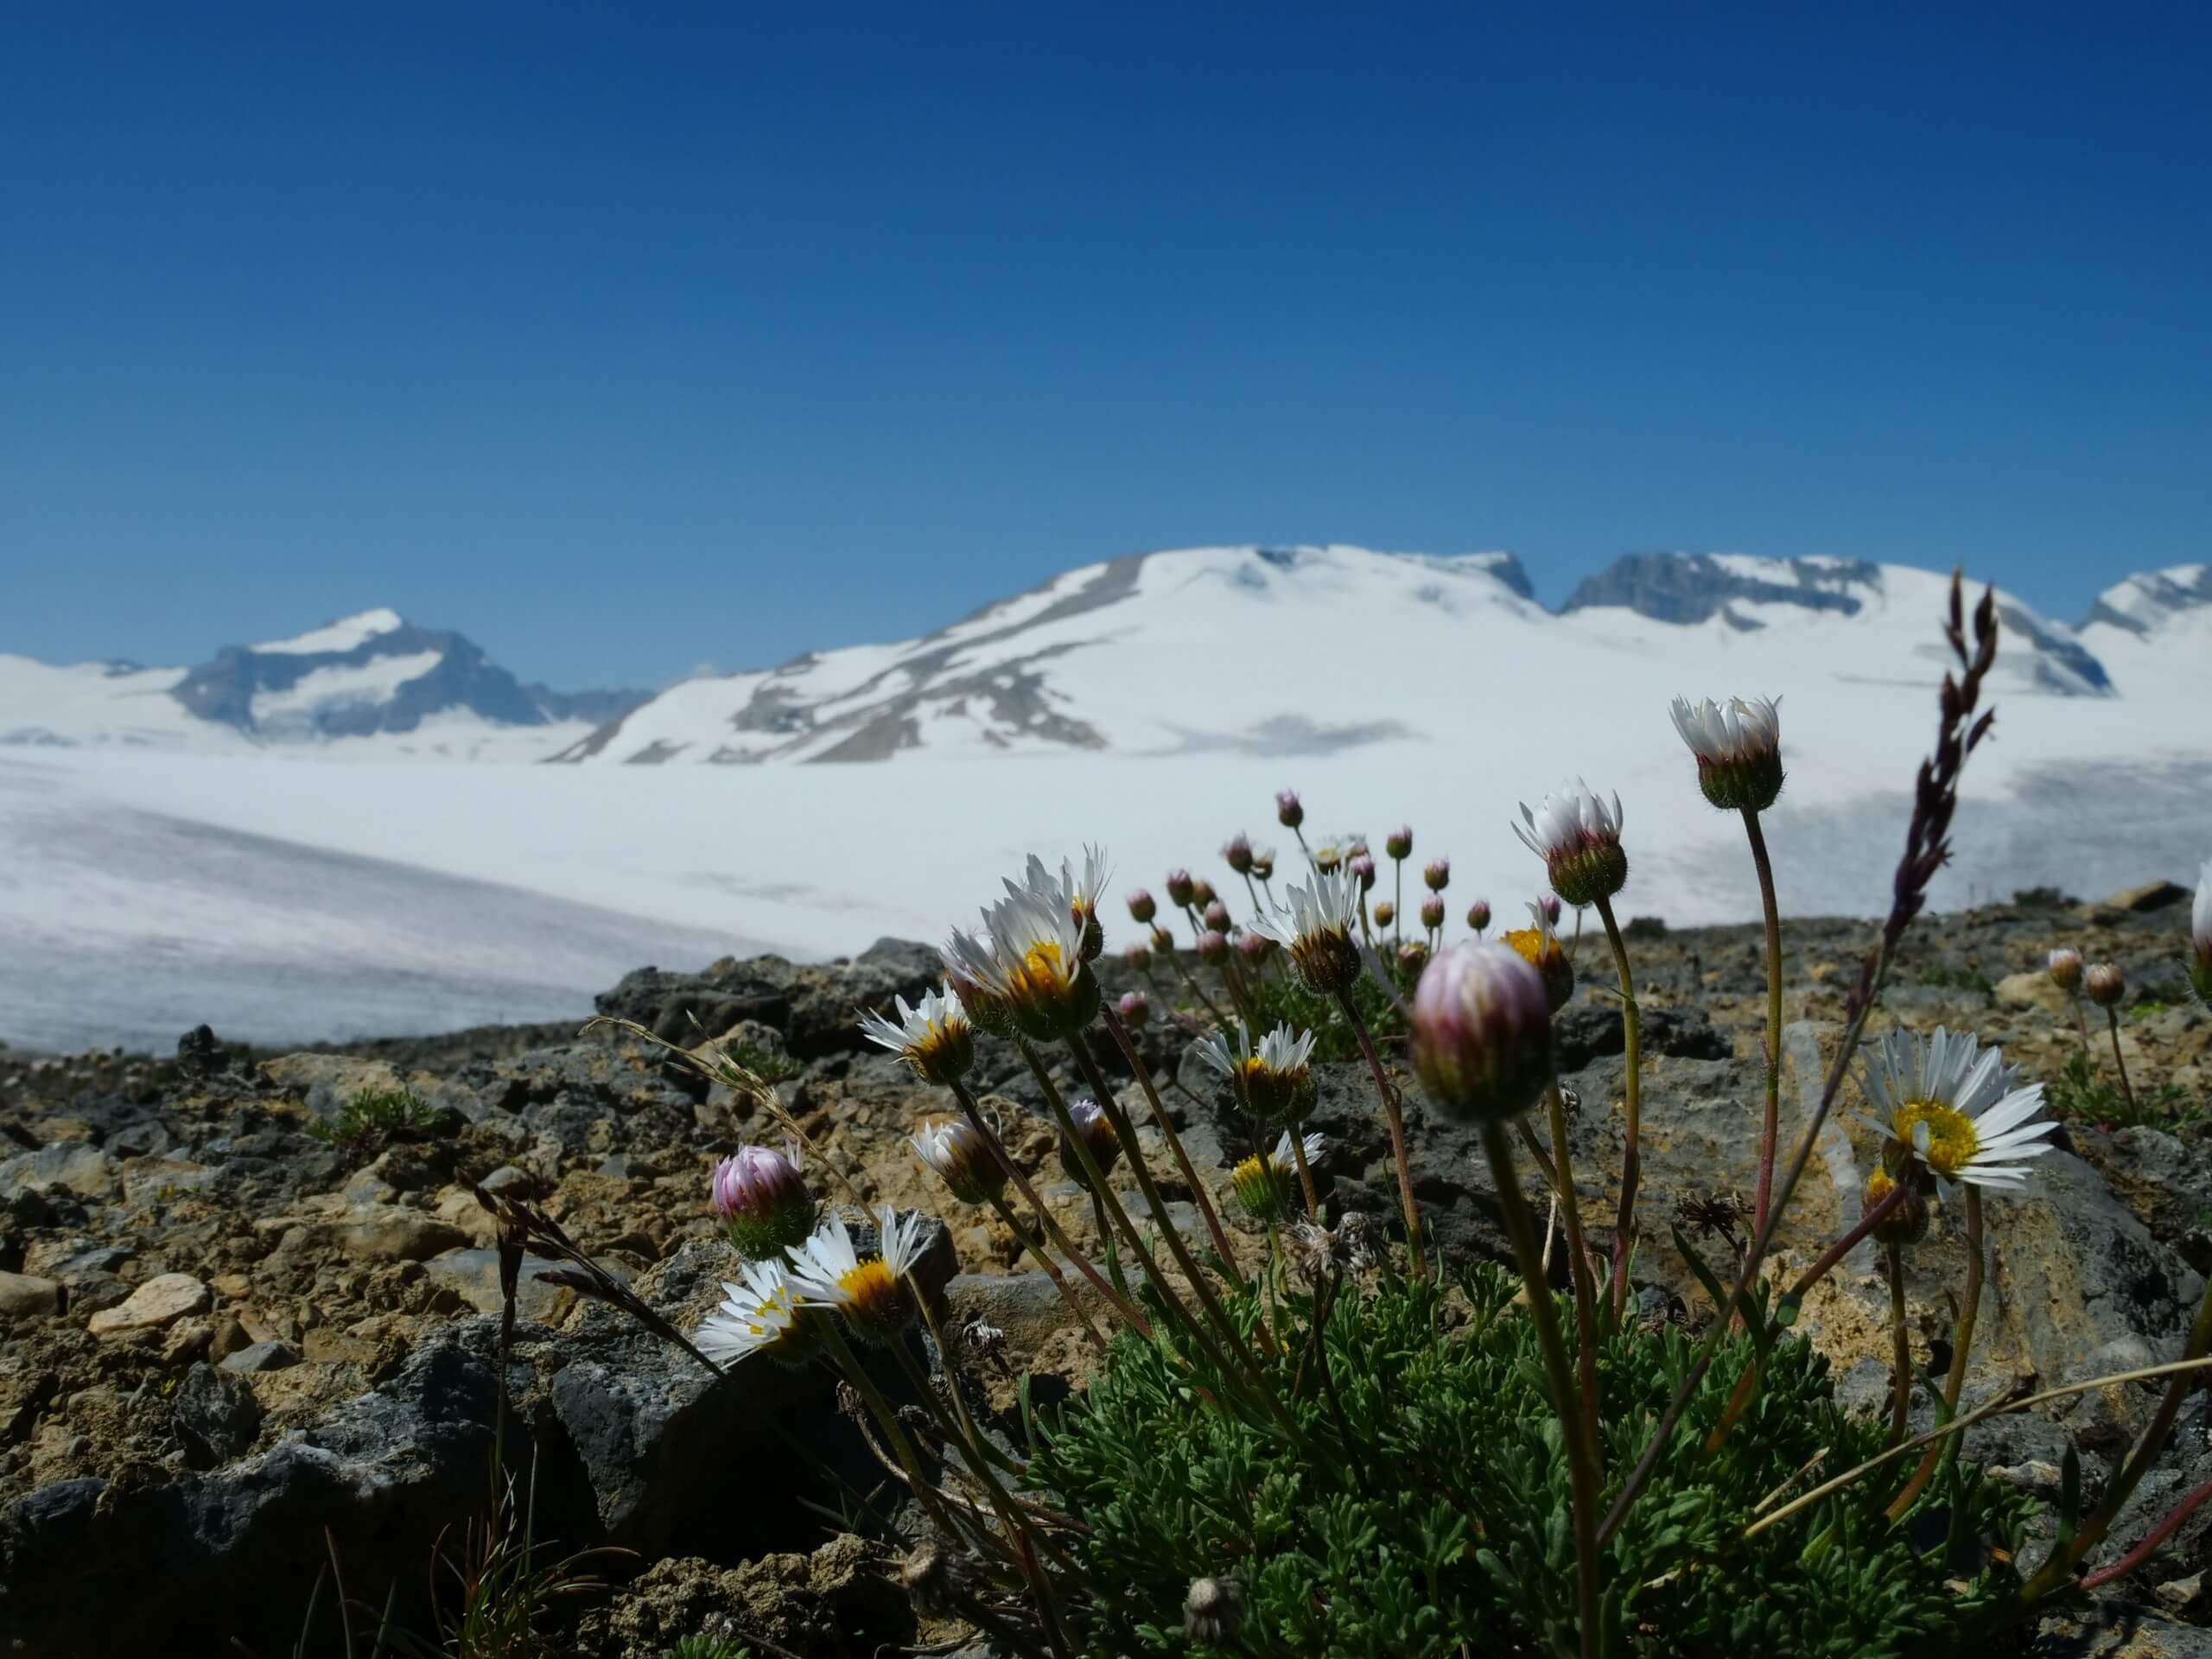 Wildflowers with Wapta Icefields in the background